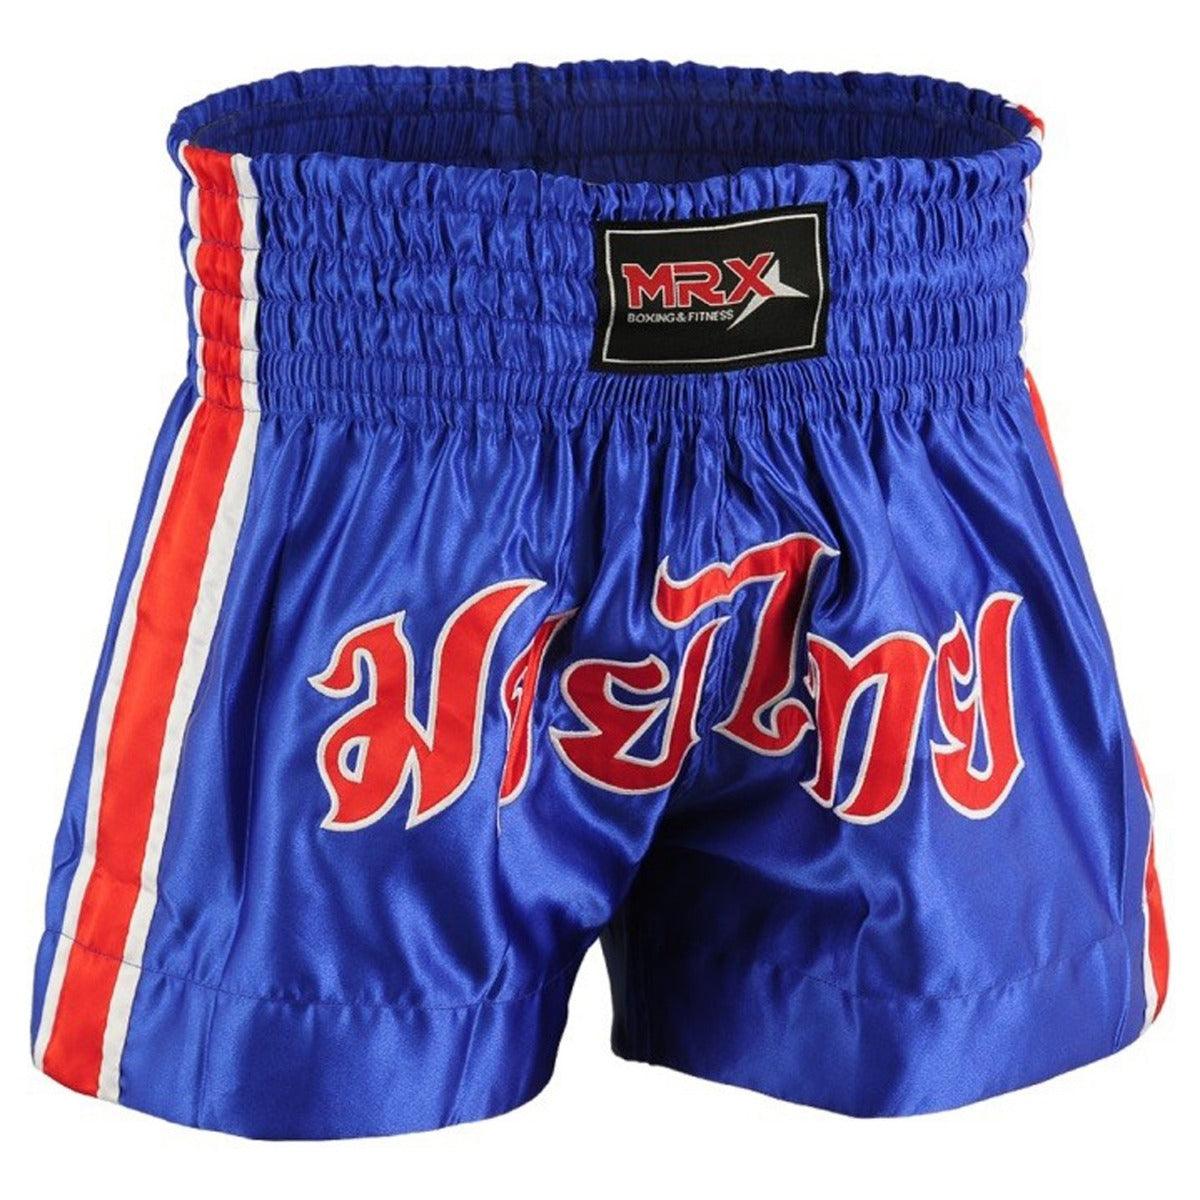 MRX Mens Boxing Shorts Fighting Shorts Blue-red-white -1302 - MRX Products 